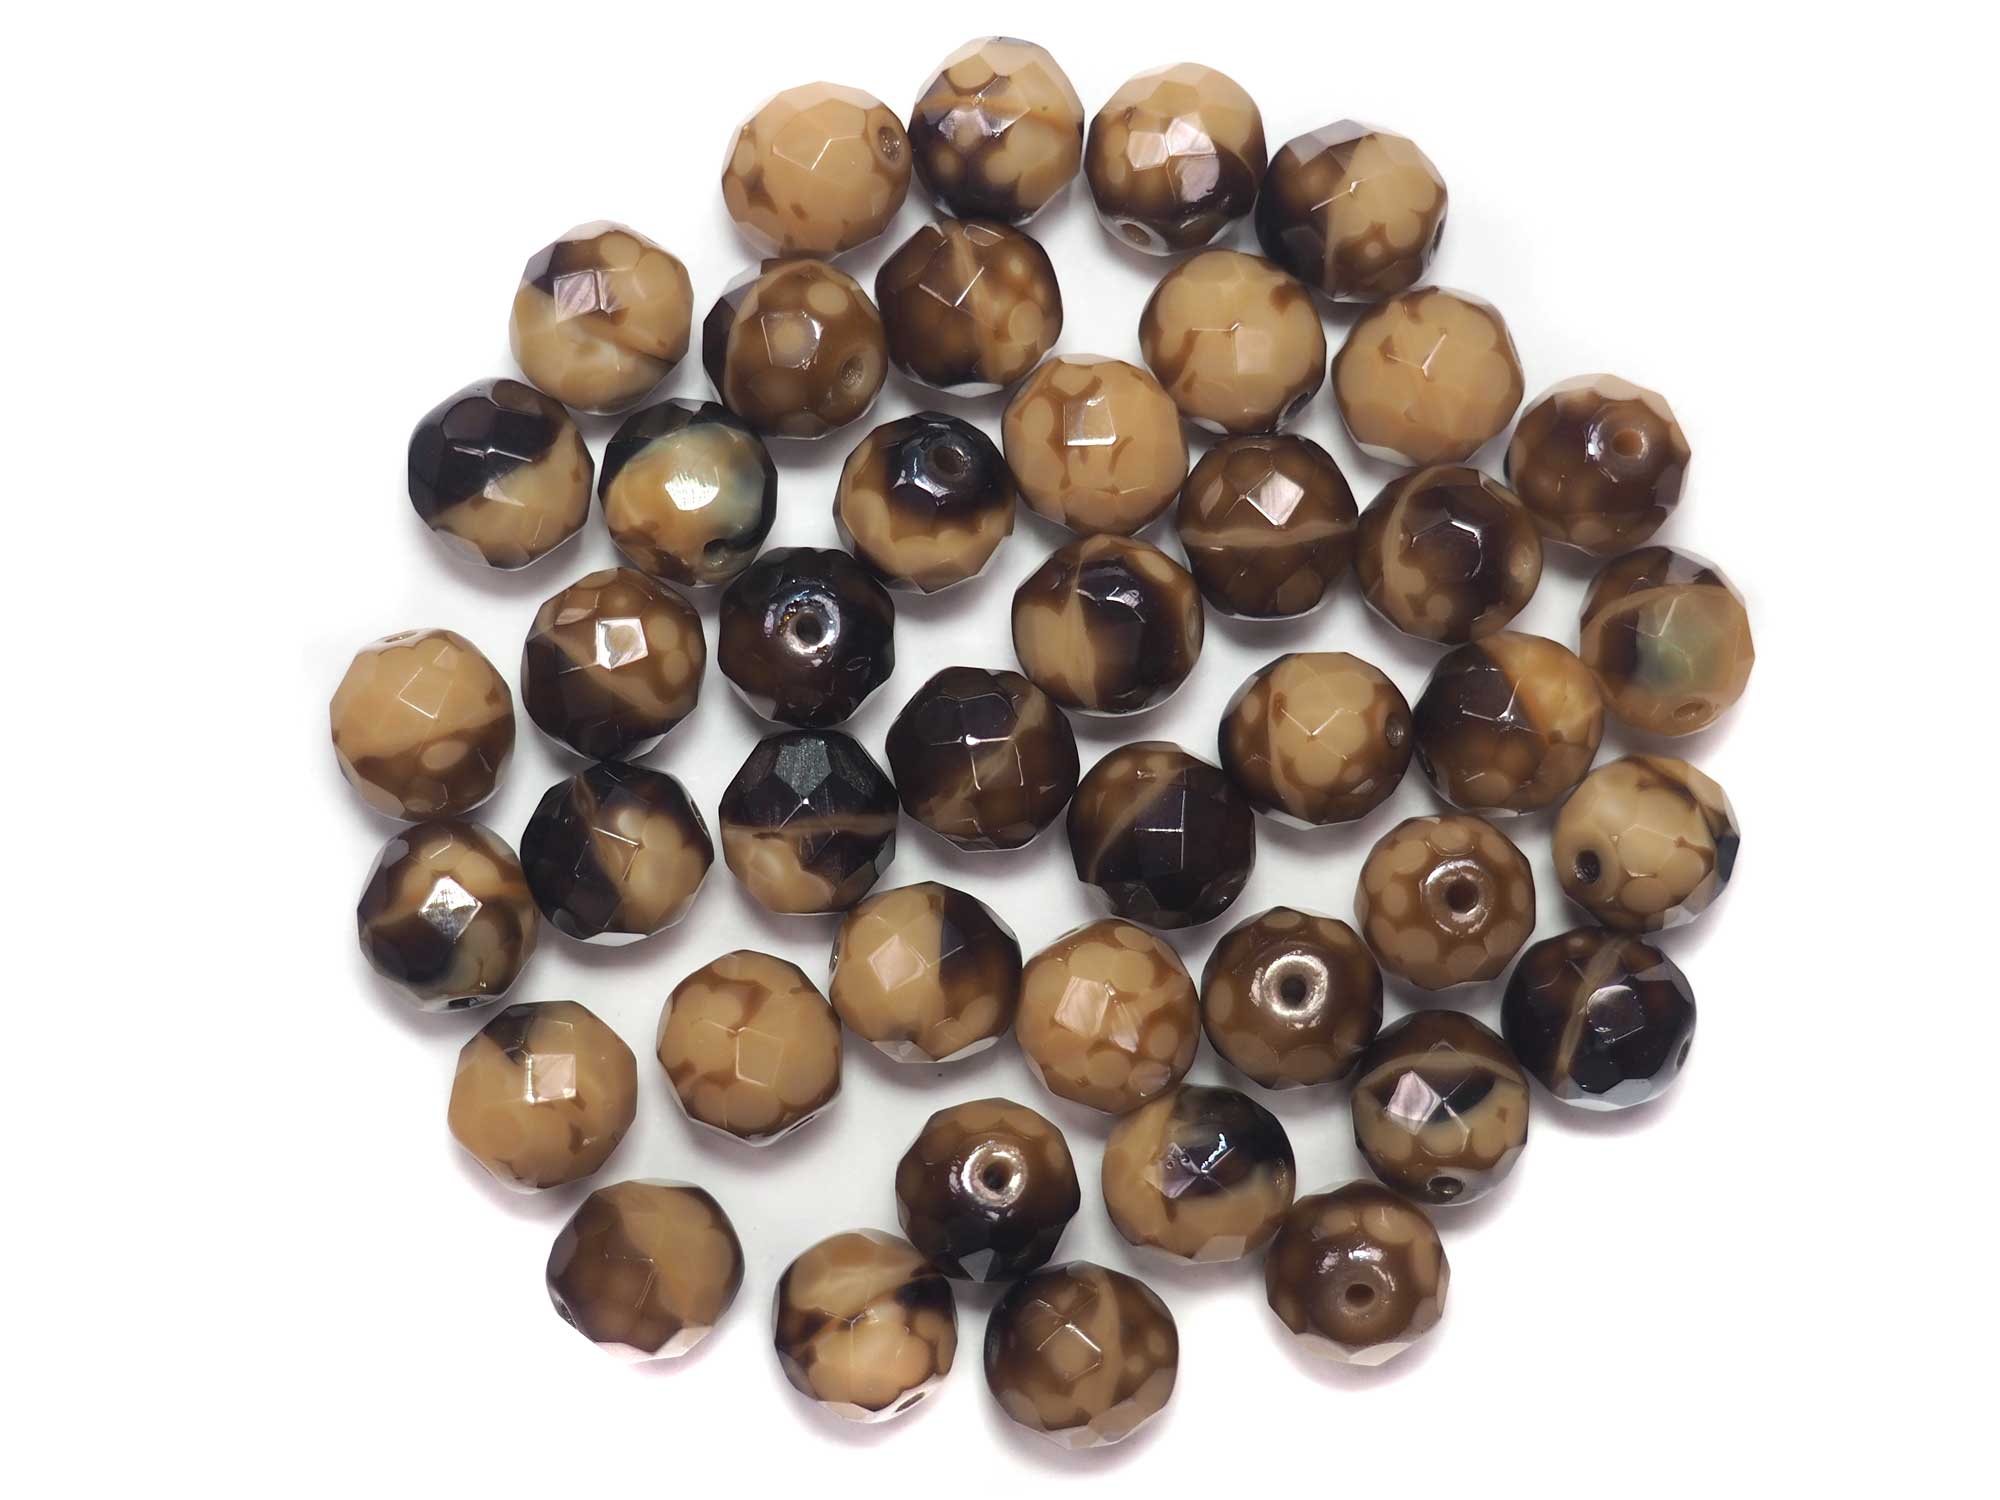 Brown Cuba Givre 2-tone combination, Czech Fire Polished Round Faceted Glass Beads, 10mm 24pcs, P506